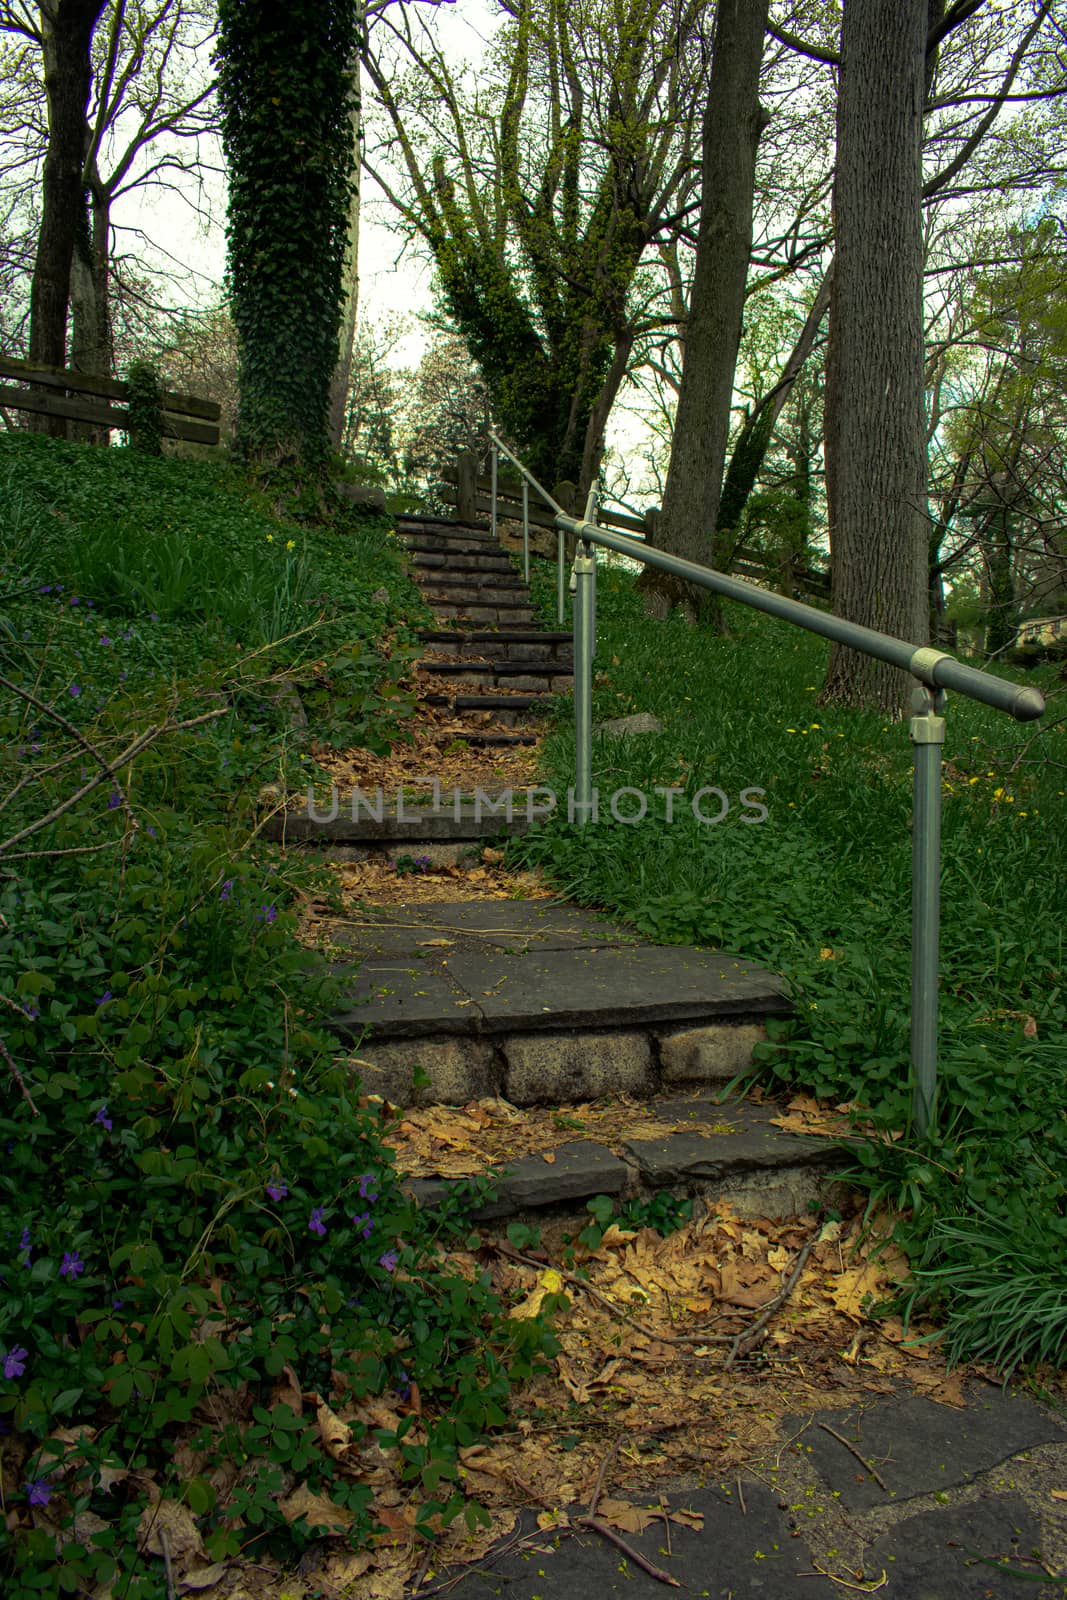 A Stone Path in an Overgrown Park Full of Greenery With a Metal Fence on the Side